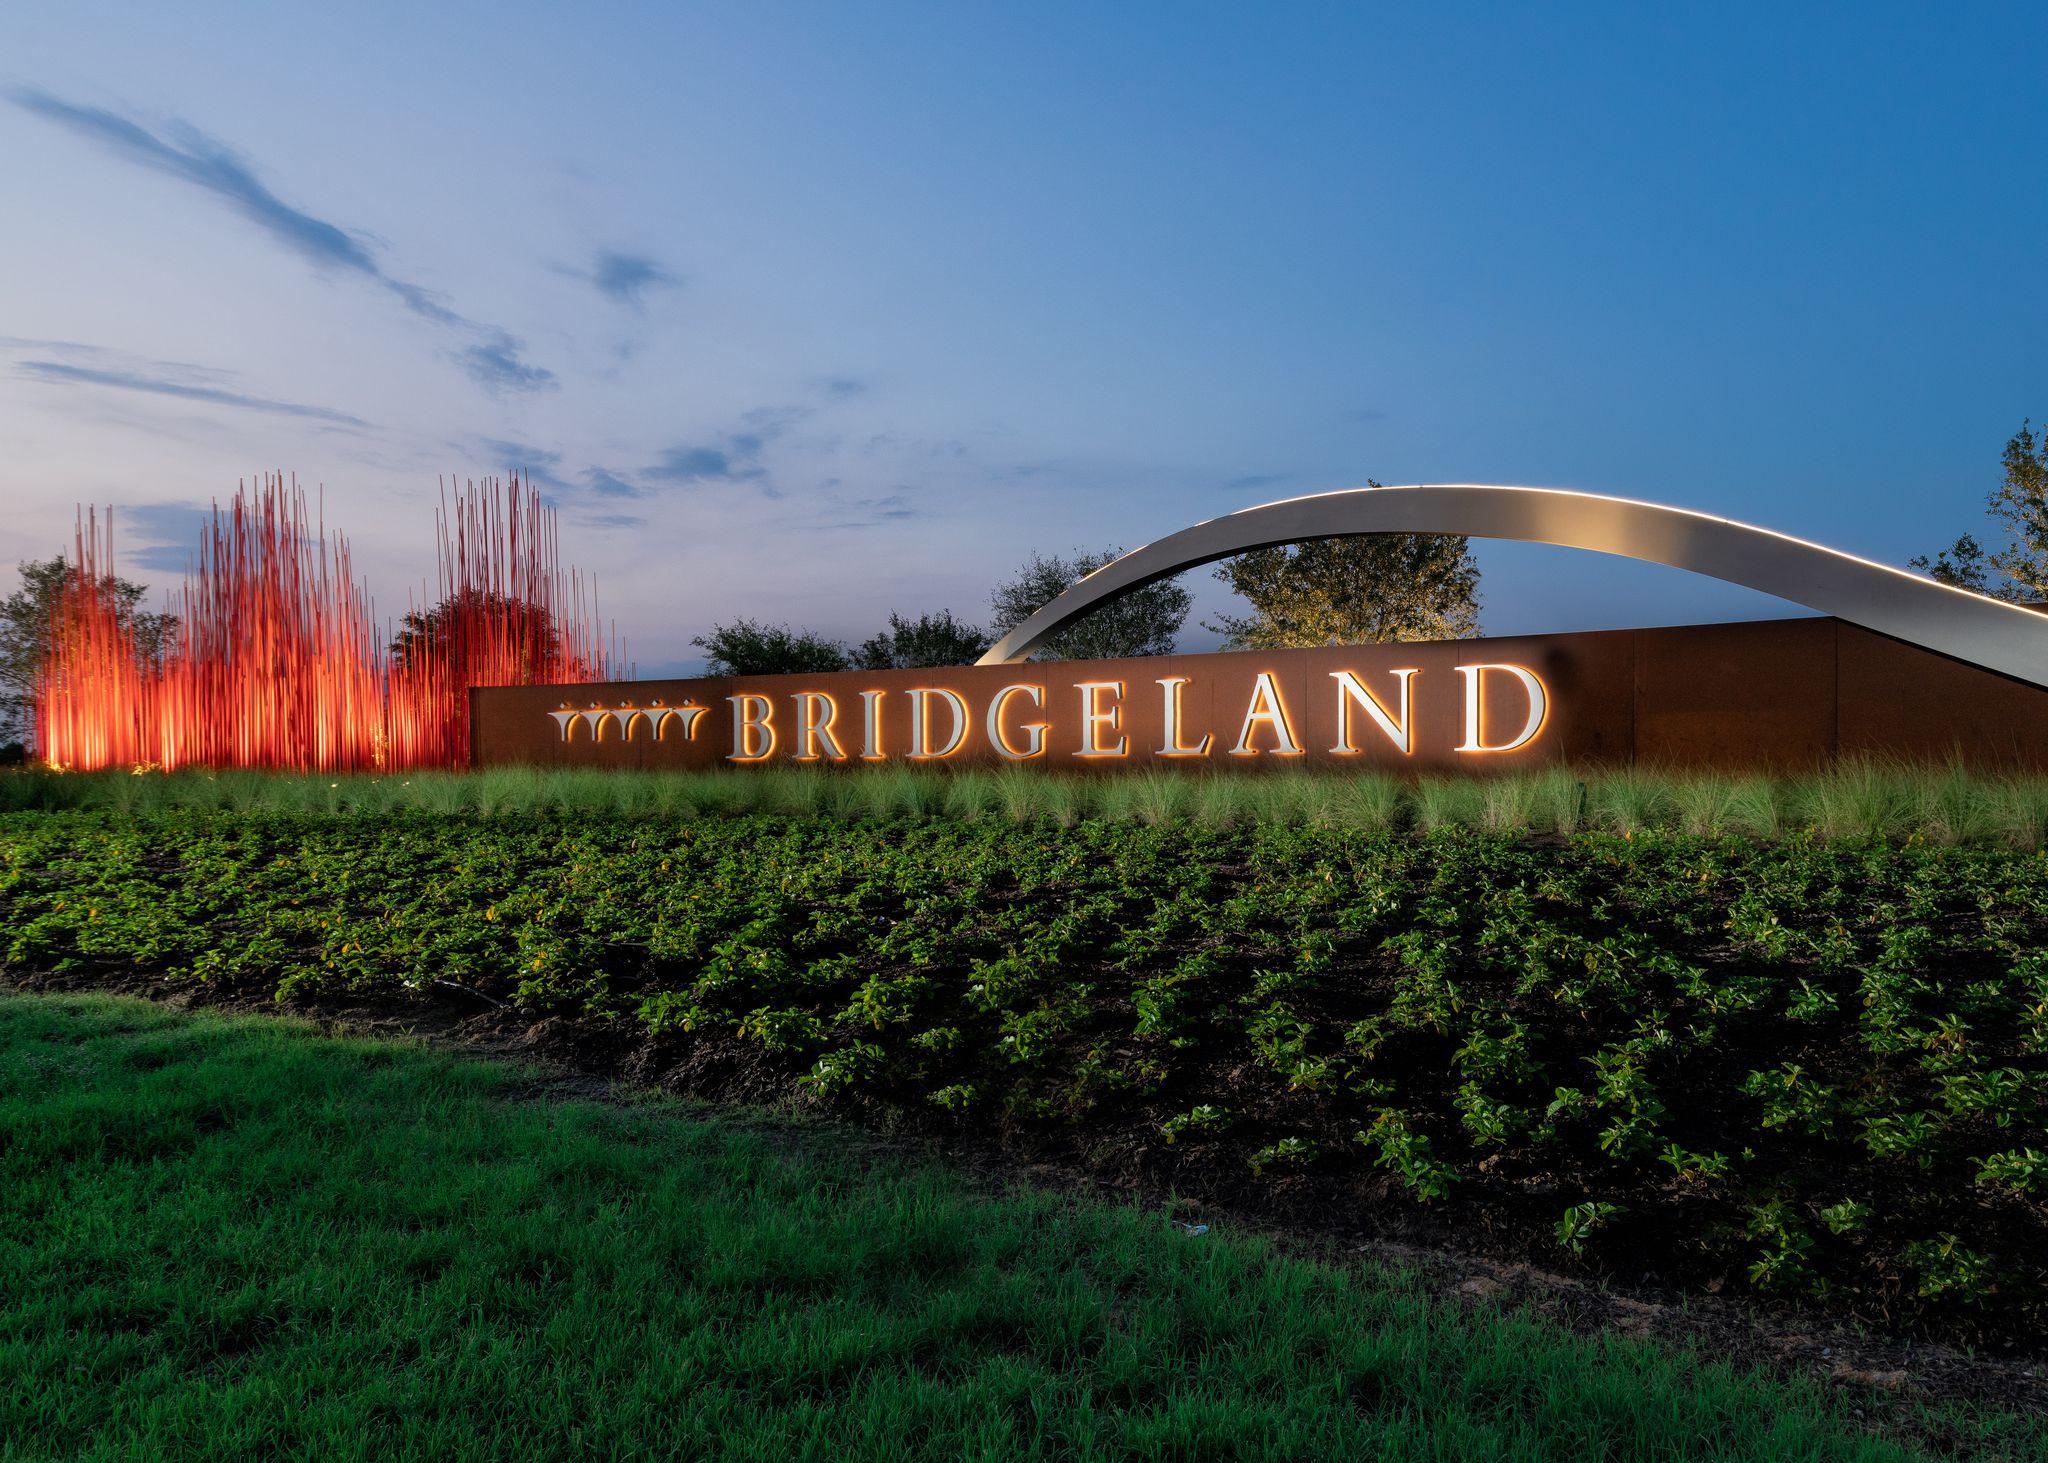 Bridgeland continues to lead with home sales through midyear